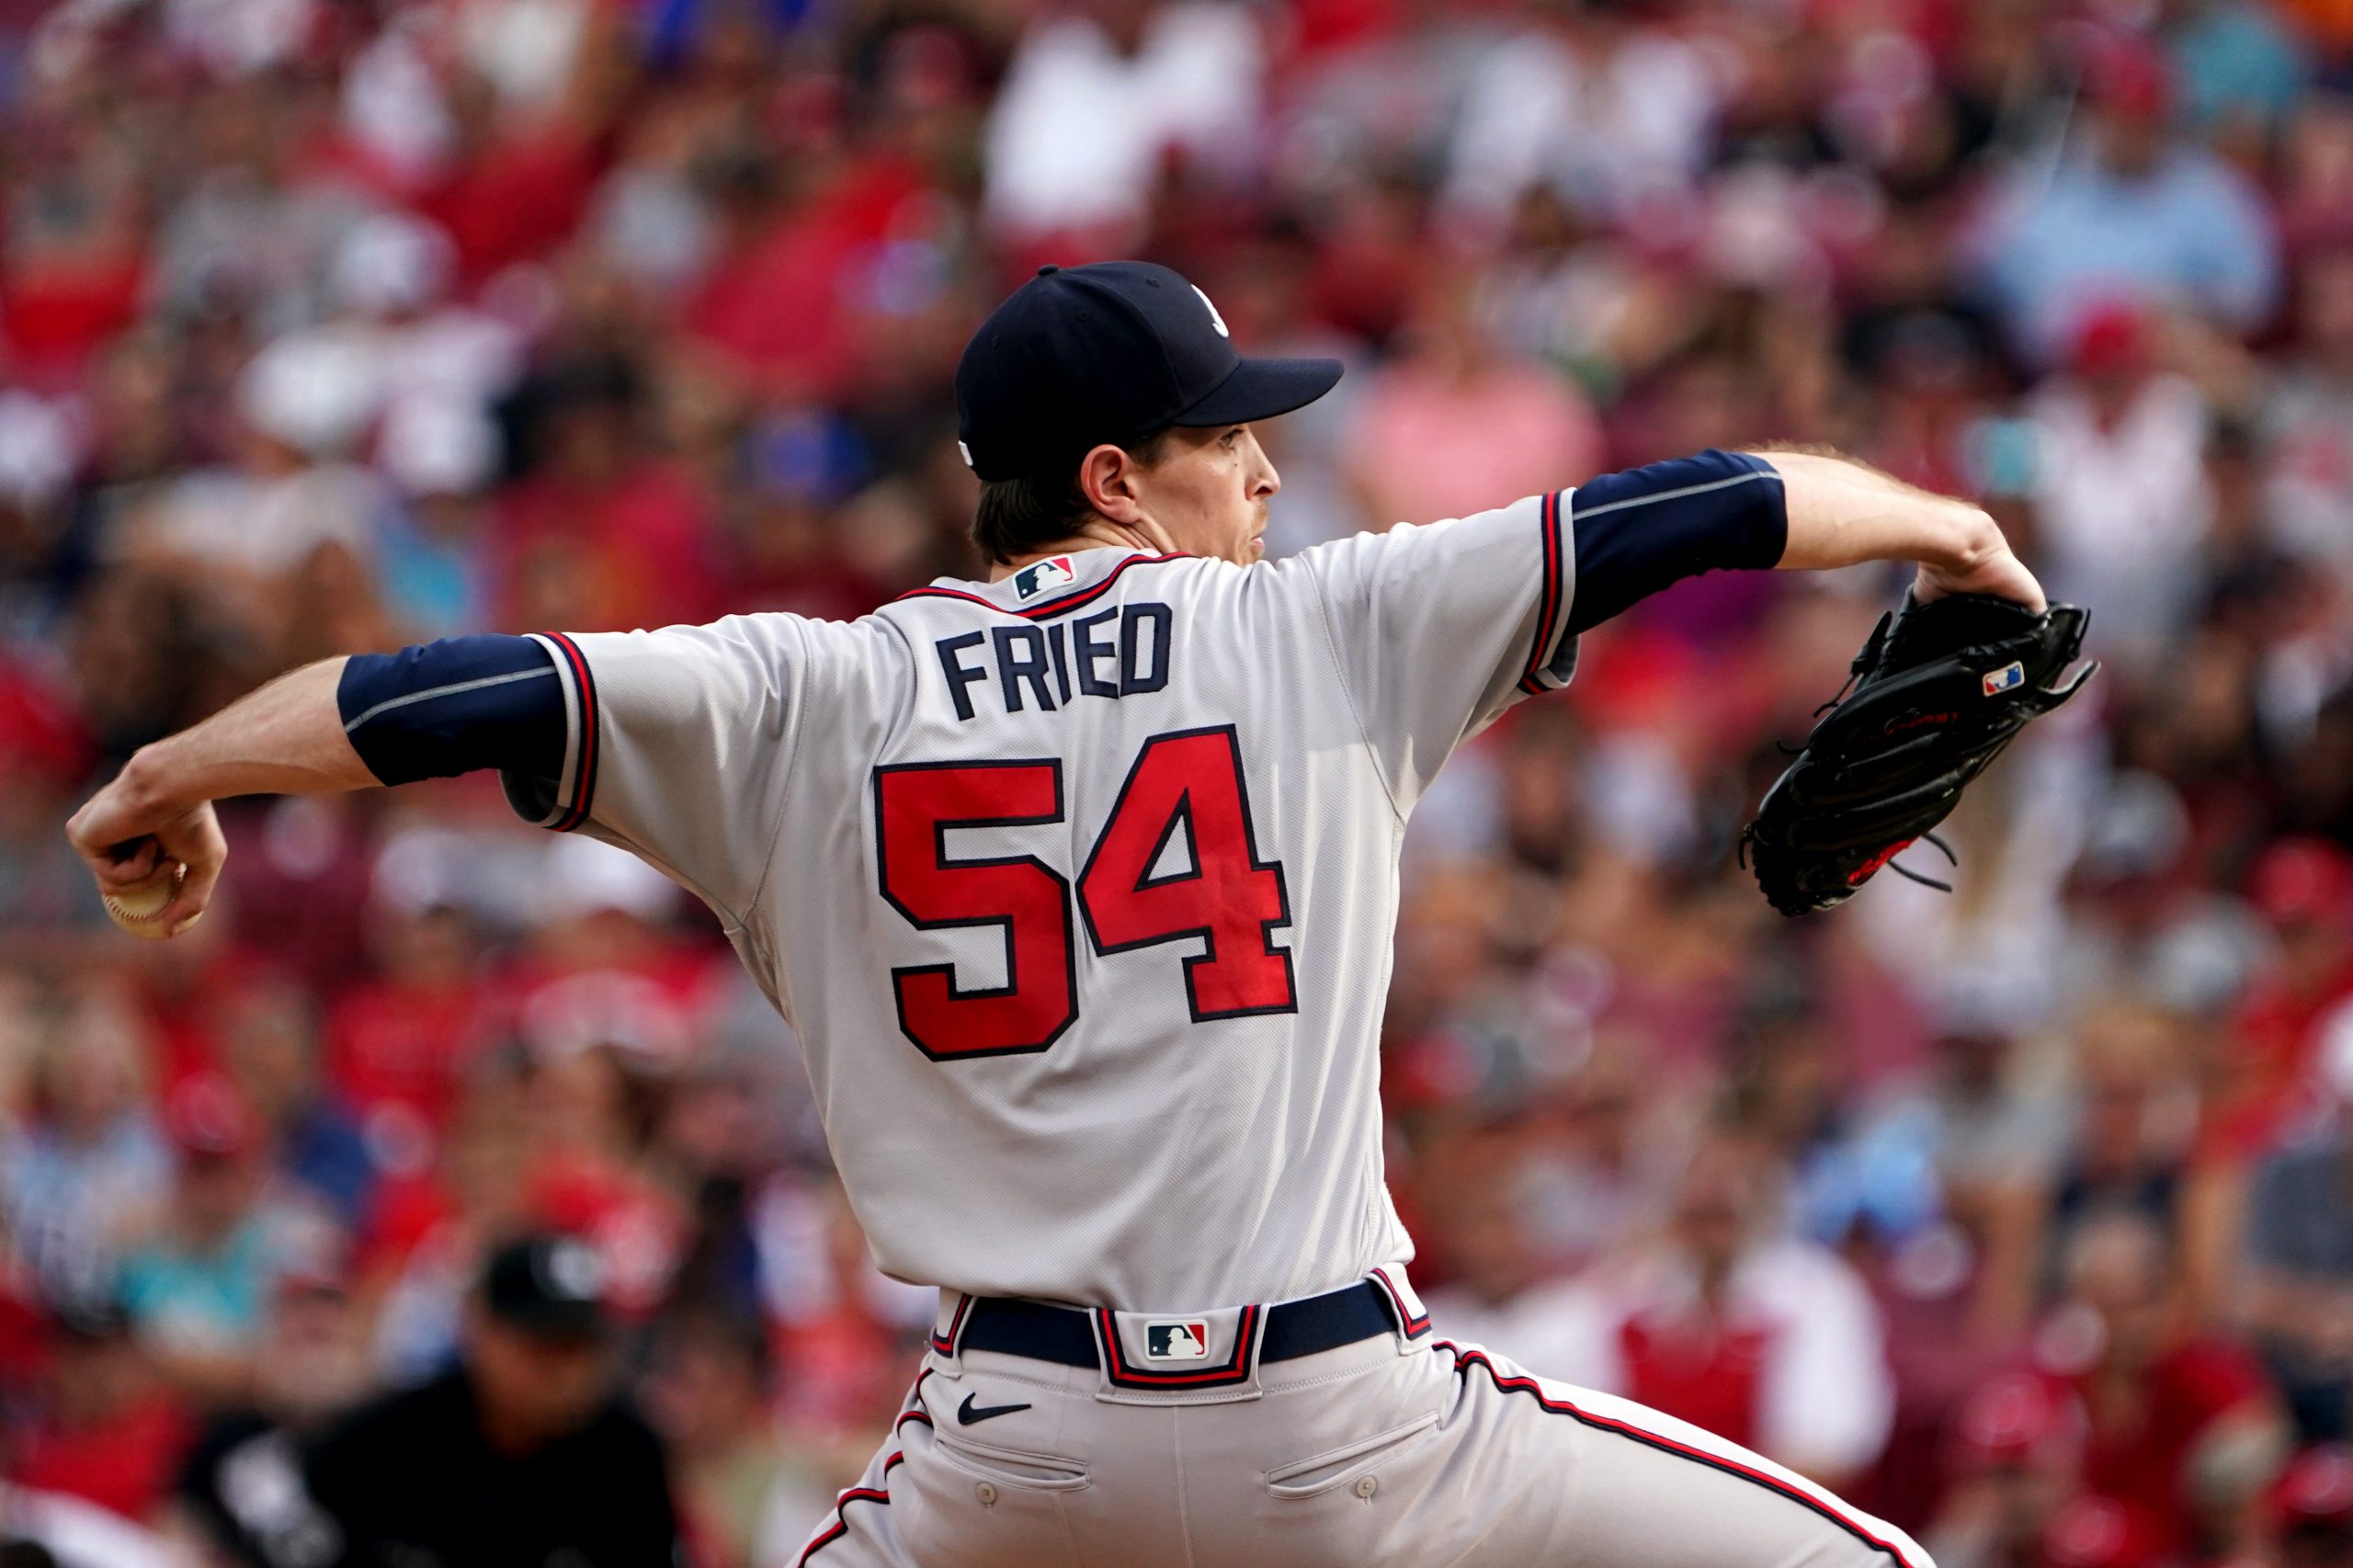 Atlanta Braves starting pitcher Max Fried (54) delivers during the first inning of a baseball game against the Cincinnati Reds, Friday, July 1, 2022, at Great American Ball Park in Cincinnati.